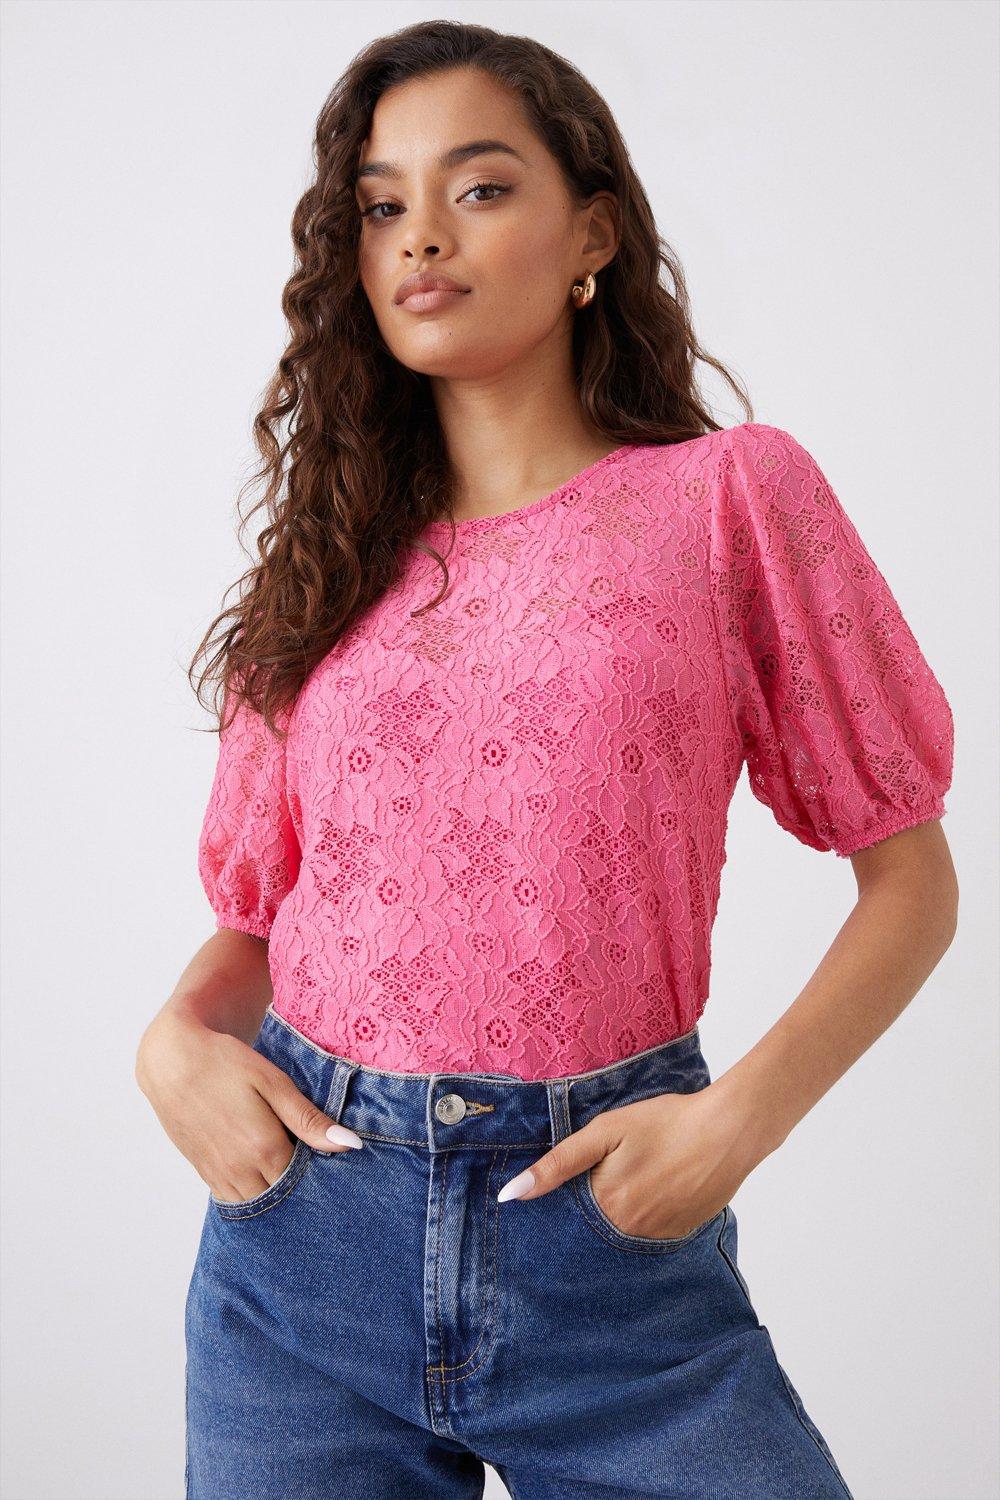 Womens Petite Pink Lace Top